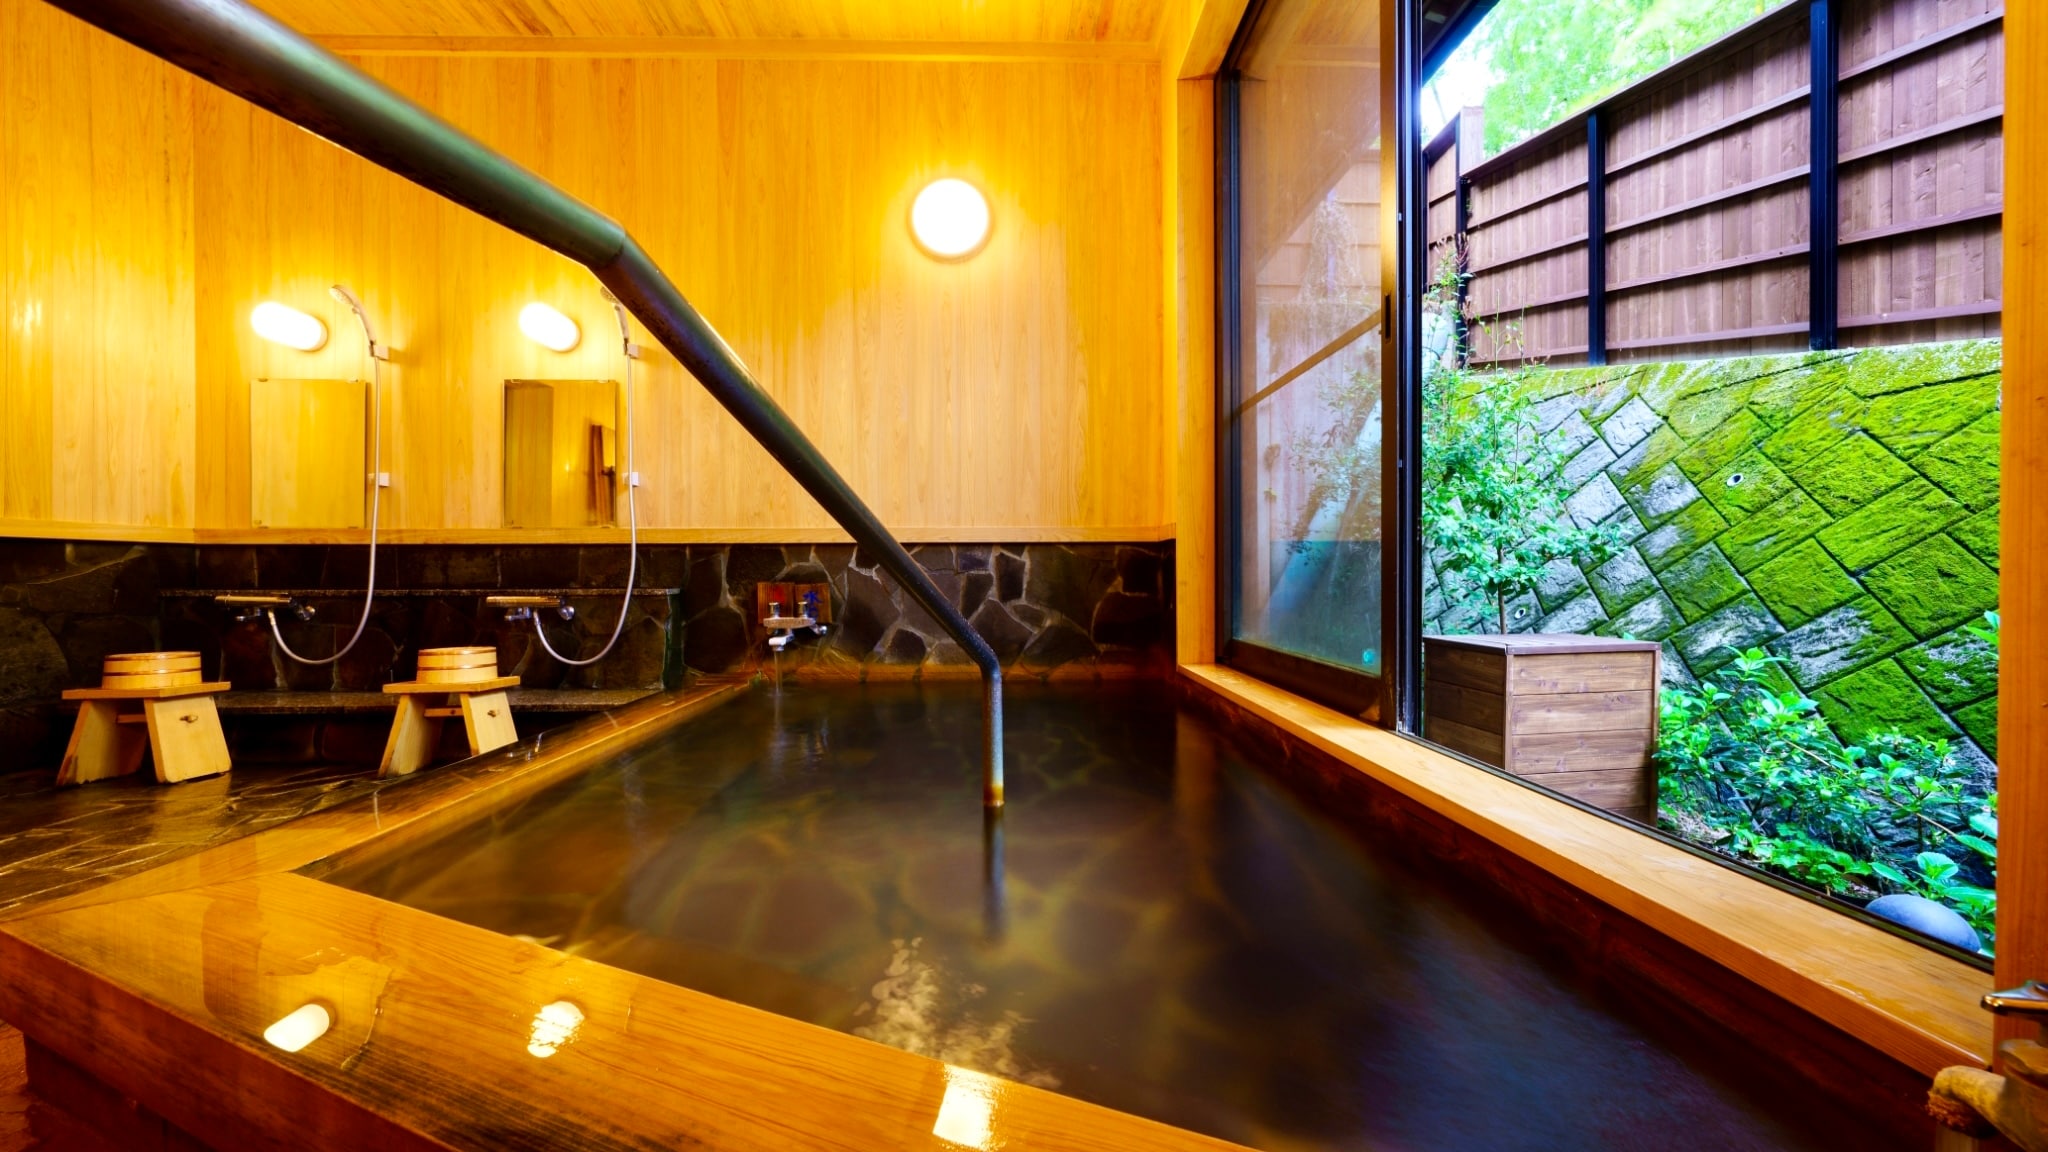 Yudokoro is a hydrogen carbonate hot spring exclusively for hotel guests.